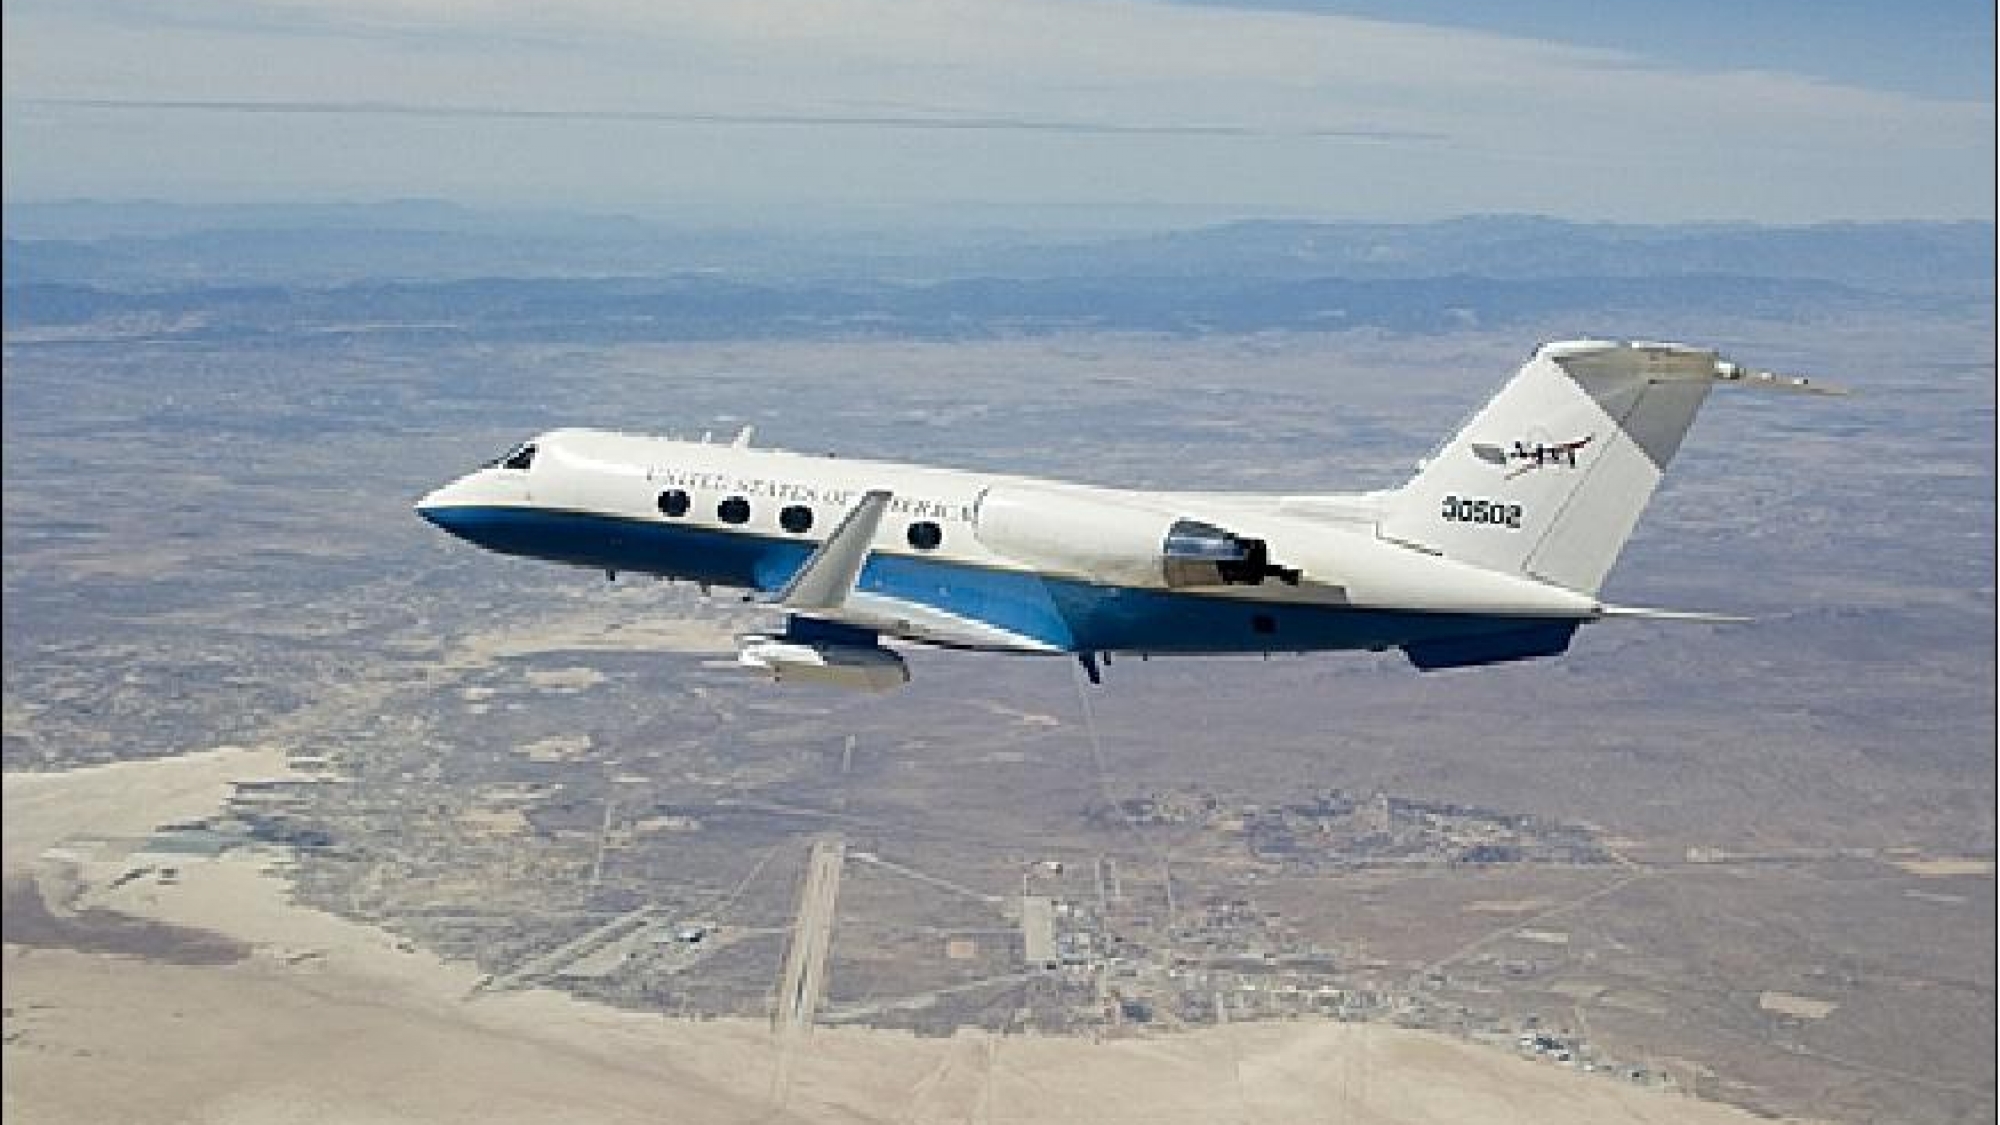 Modified NASA Gulfstream III in early flight tests with the UAVSAR pod attached to the underside of the aircraft (image credit: NASA/DFRC)